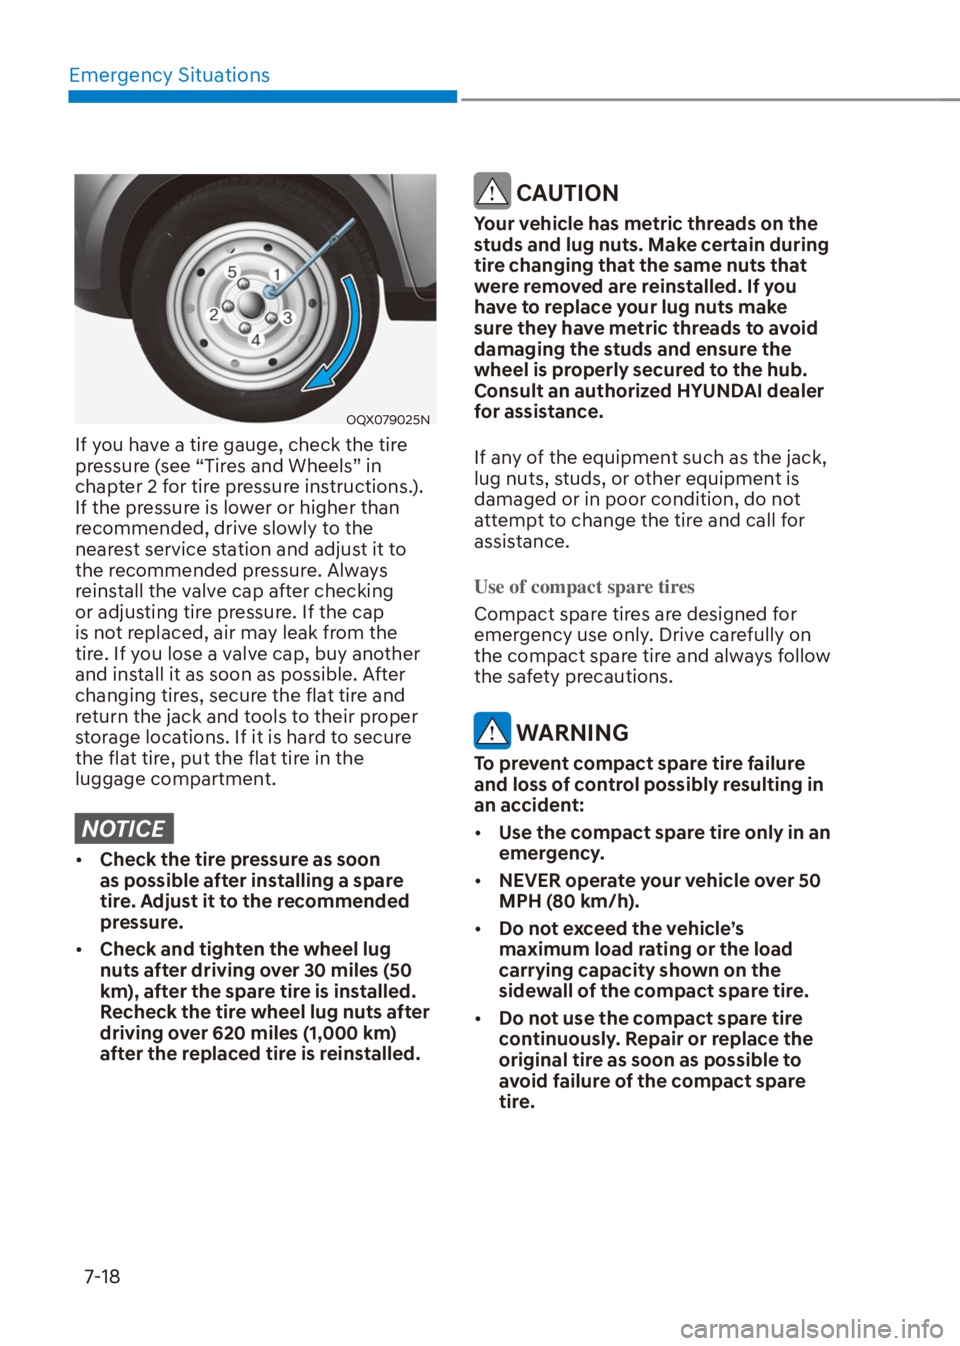 HYUNDAI VENUE 2022  Owners Manual Emergency Situations
7-18
OQX079025N
If you have a tire gauge, check the tire 
pressure (see “Tires and Wheels” in 
chapter 2 for tire pressure instructions.). 
If the pressure is lower or higher 